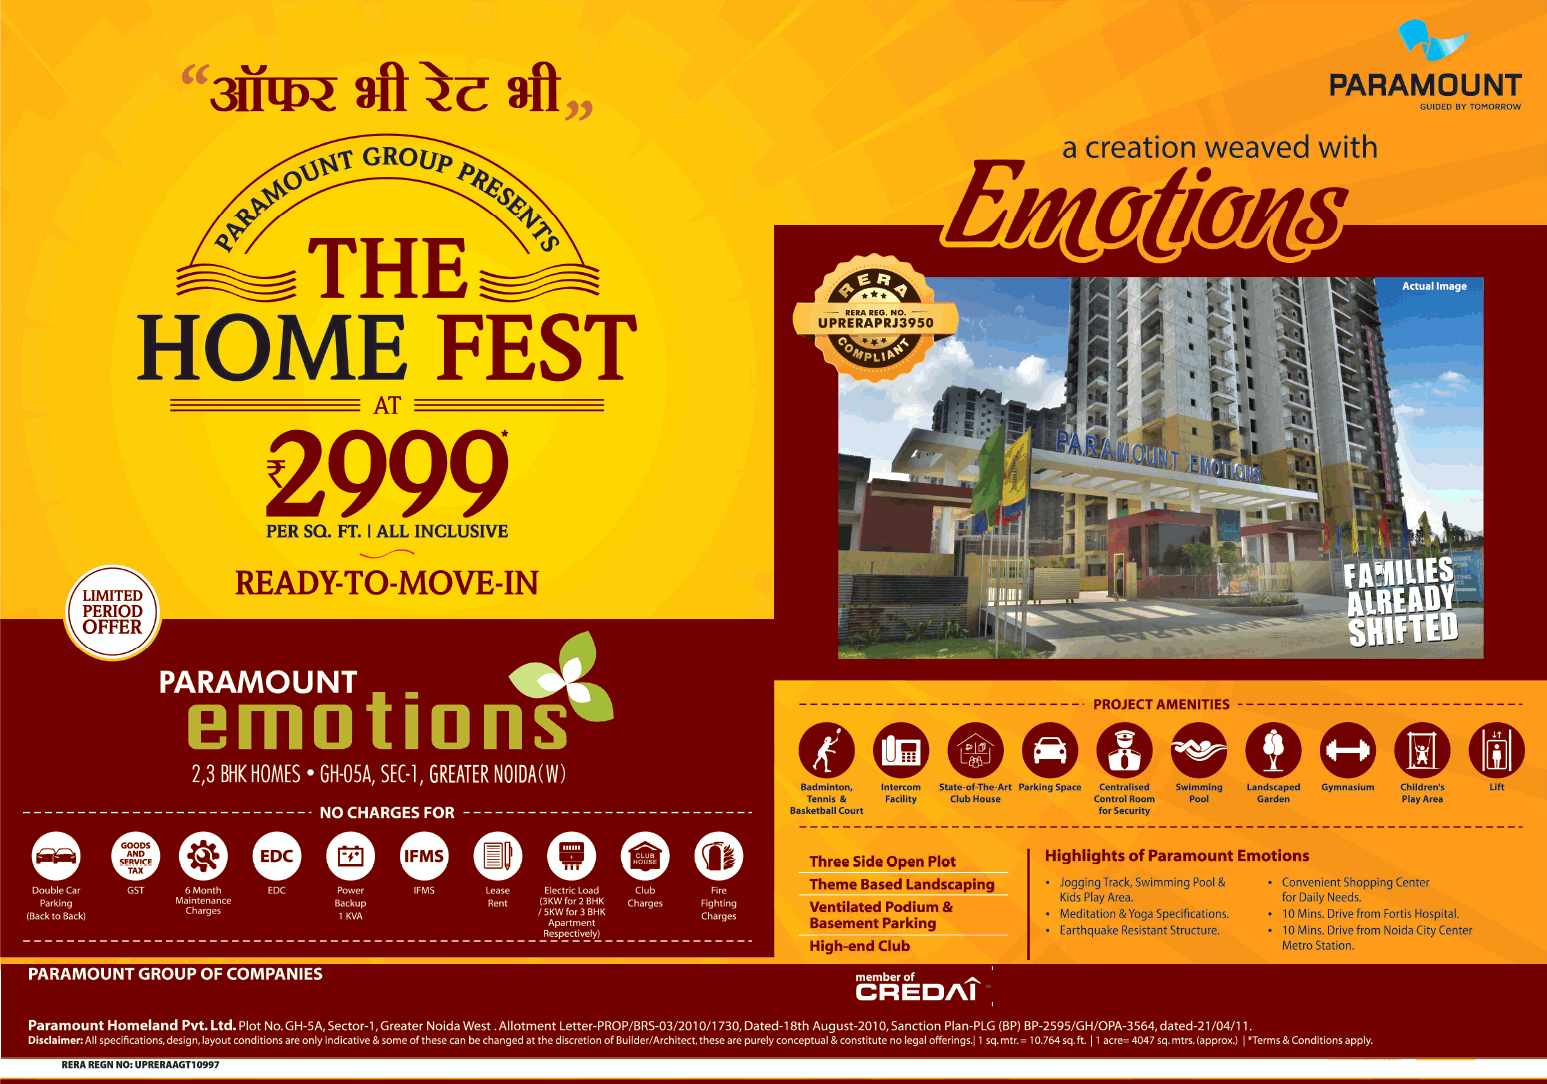 Book ready to move in homes at Rs. 2999 per sq.ft. at Paramount Emotions in Greater Noida